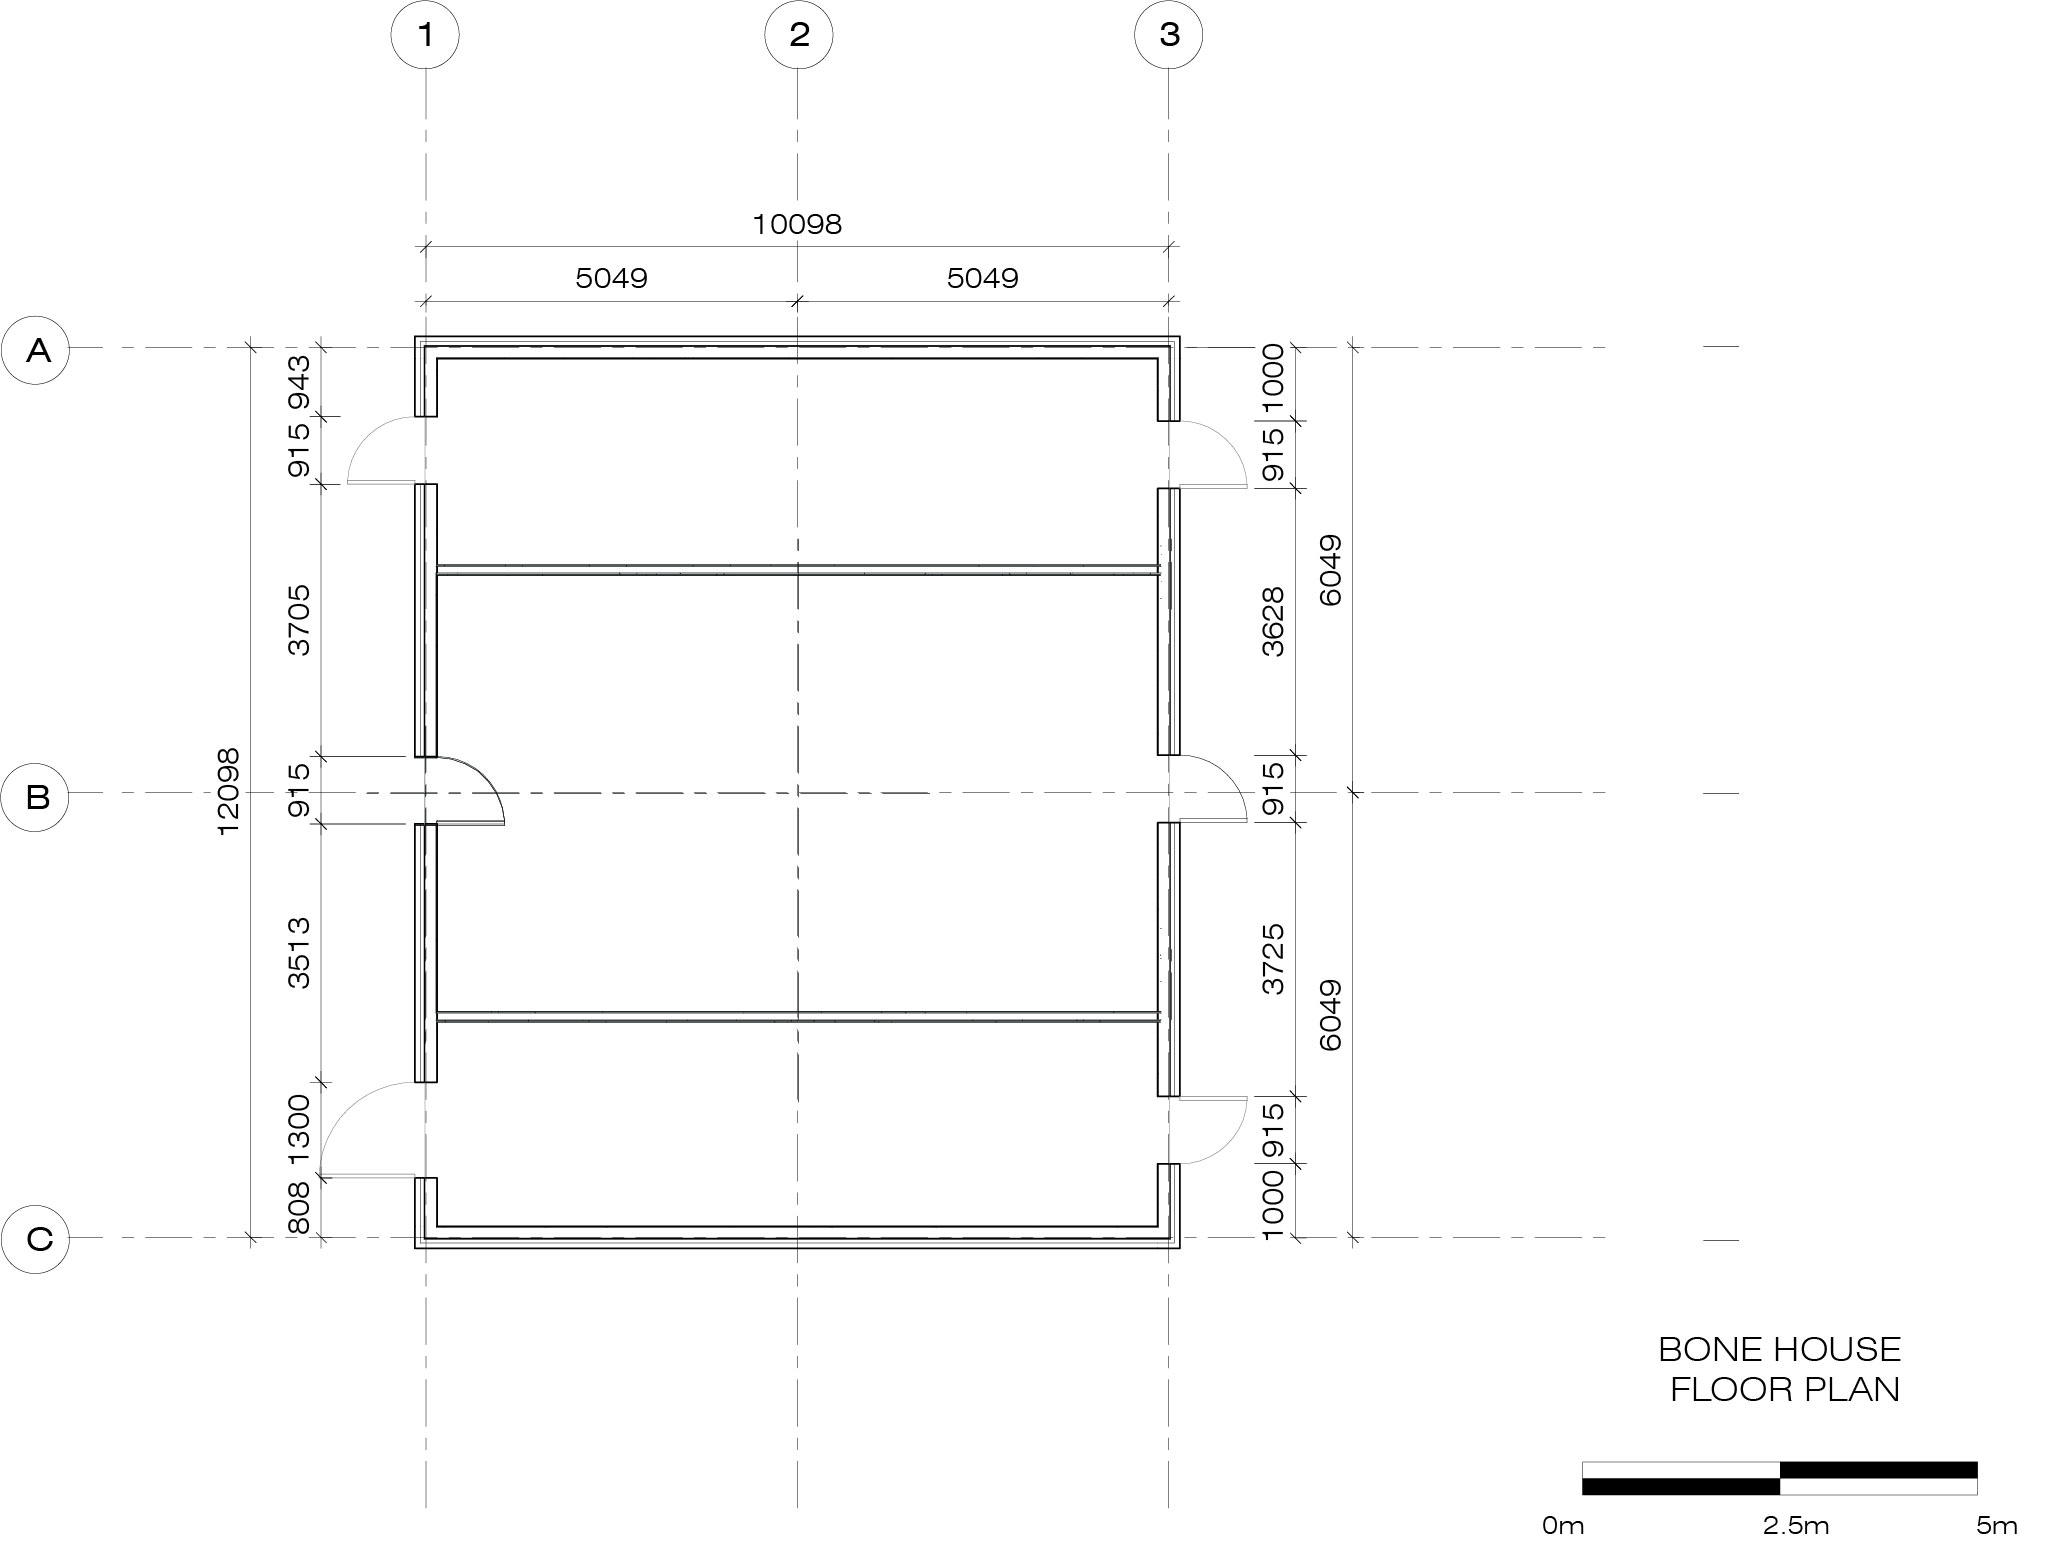 Floor Plan of the Bonehouse, created in Revit from the laser scanning data collected.